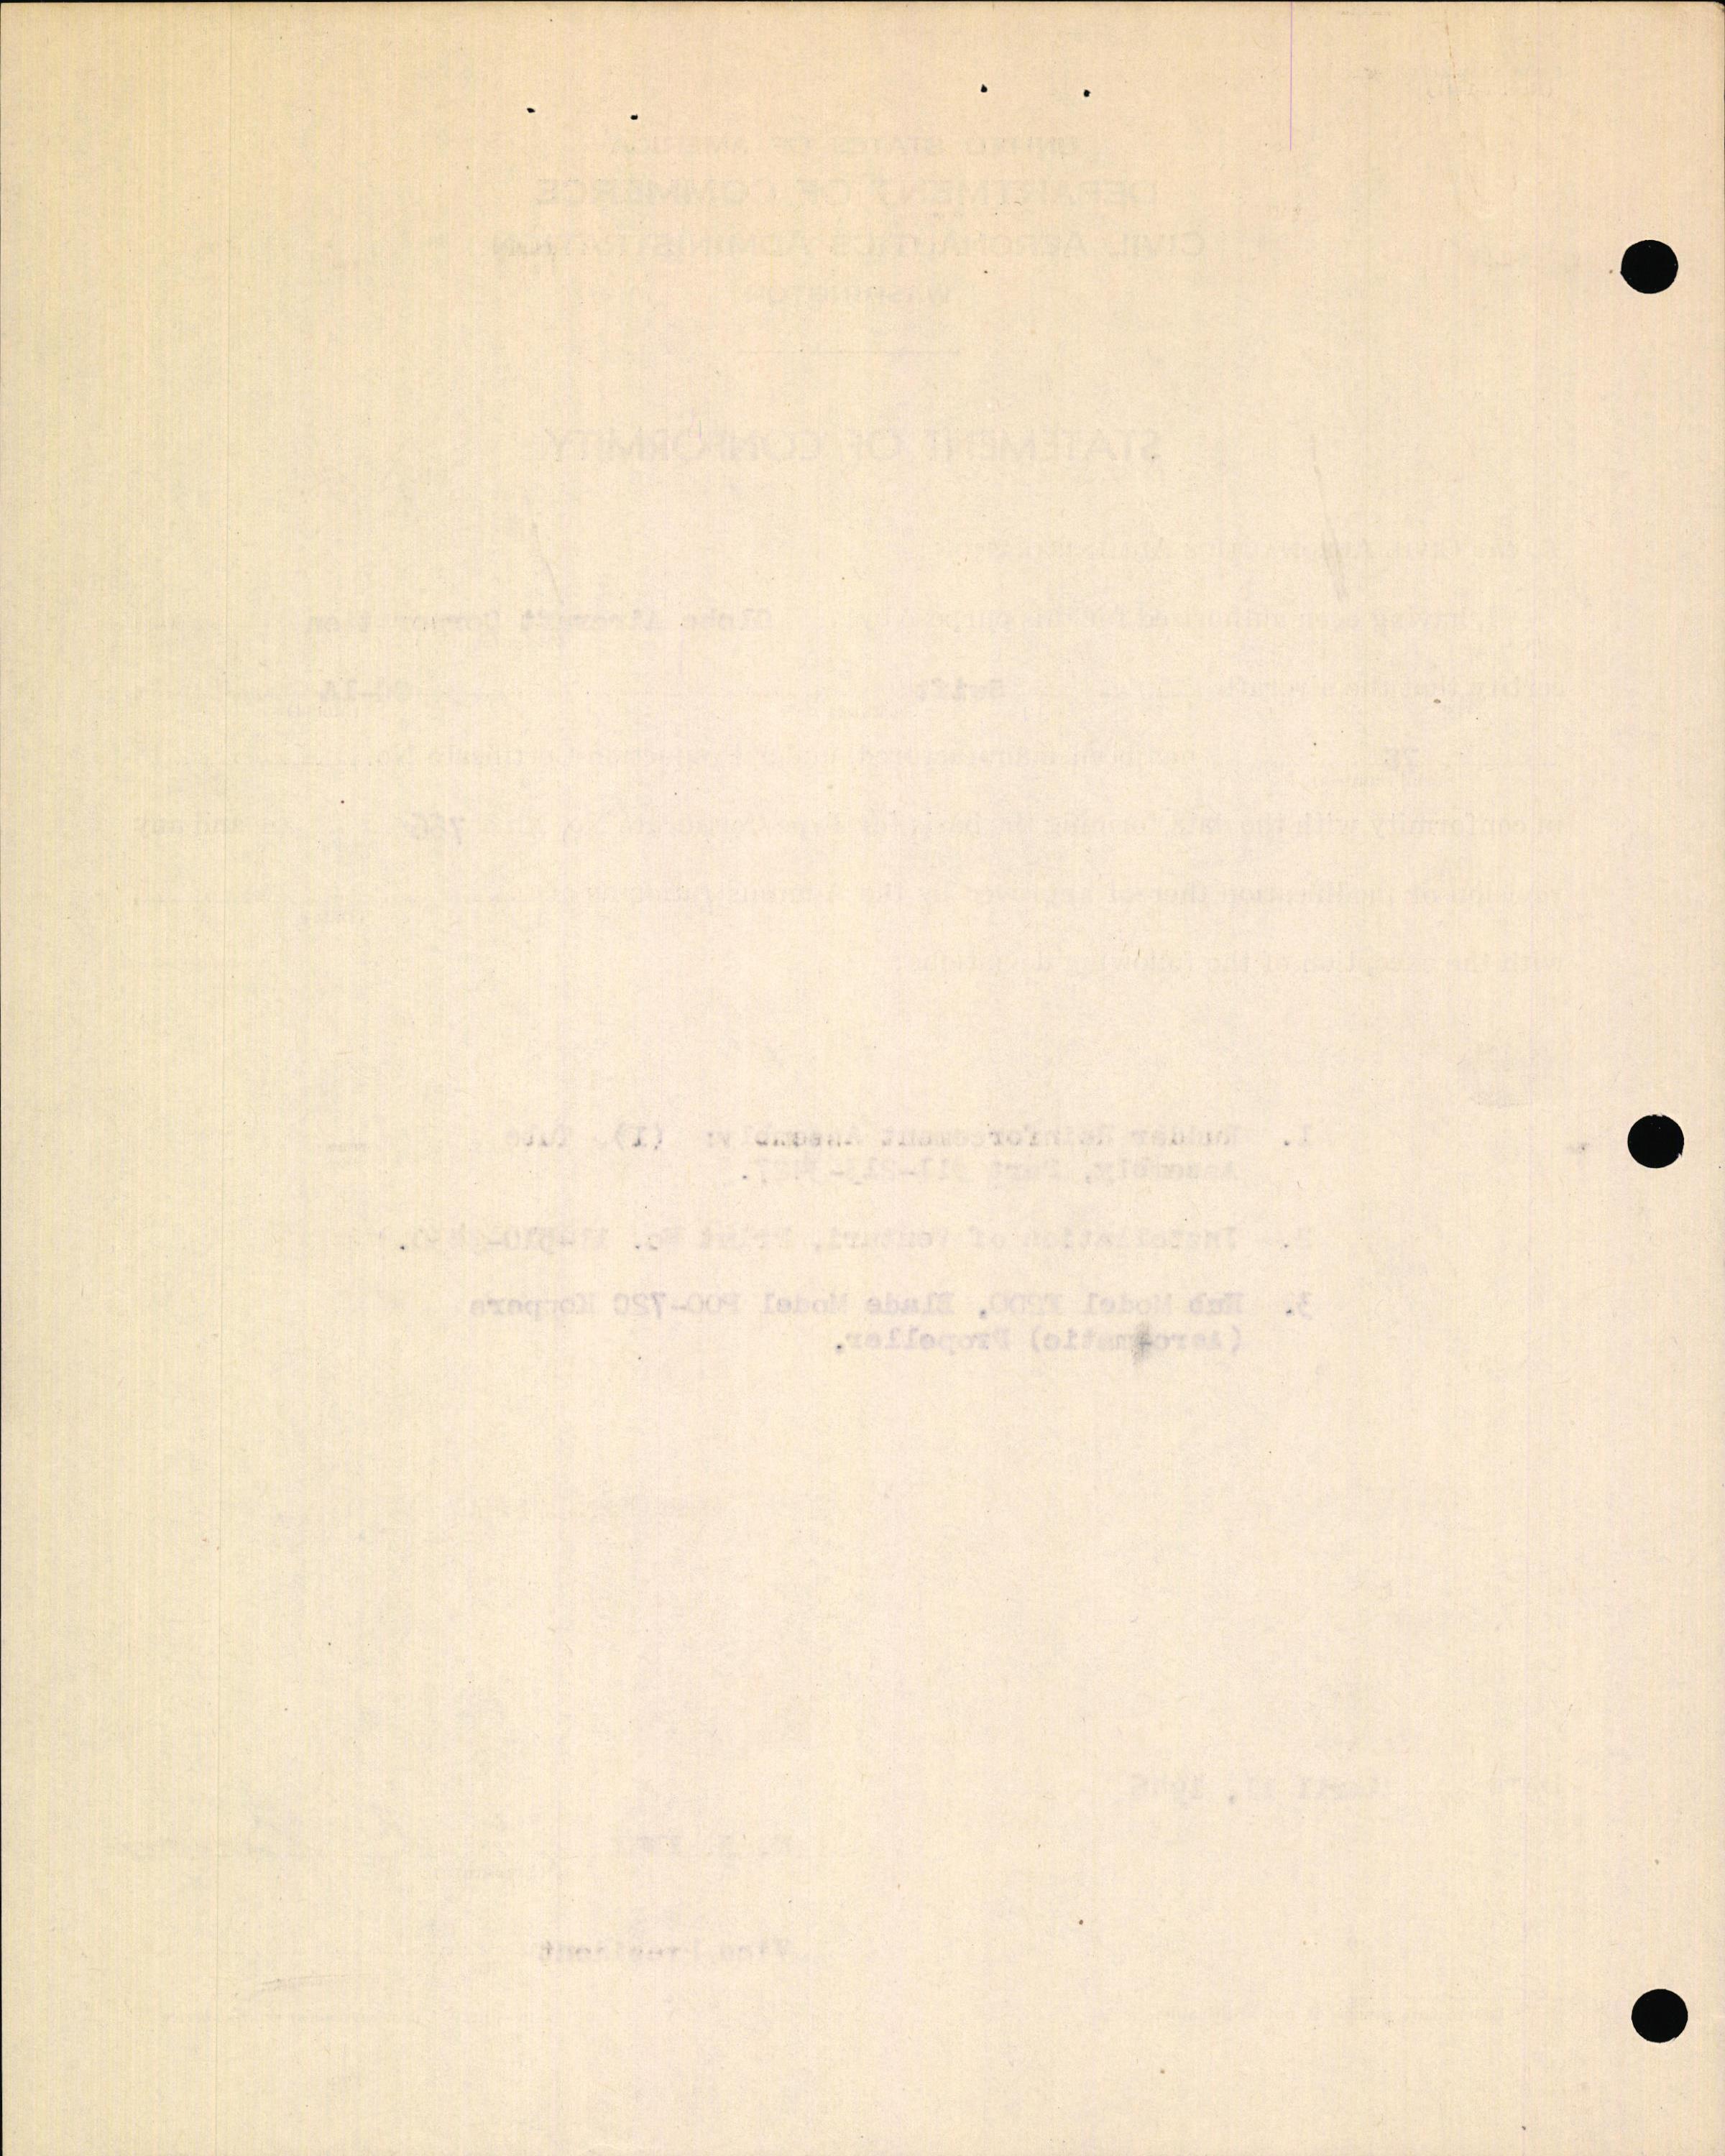 Sample page 8 from AirCorps Library document: Technical Information for Serial Number 78